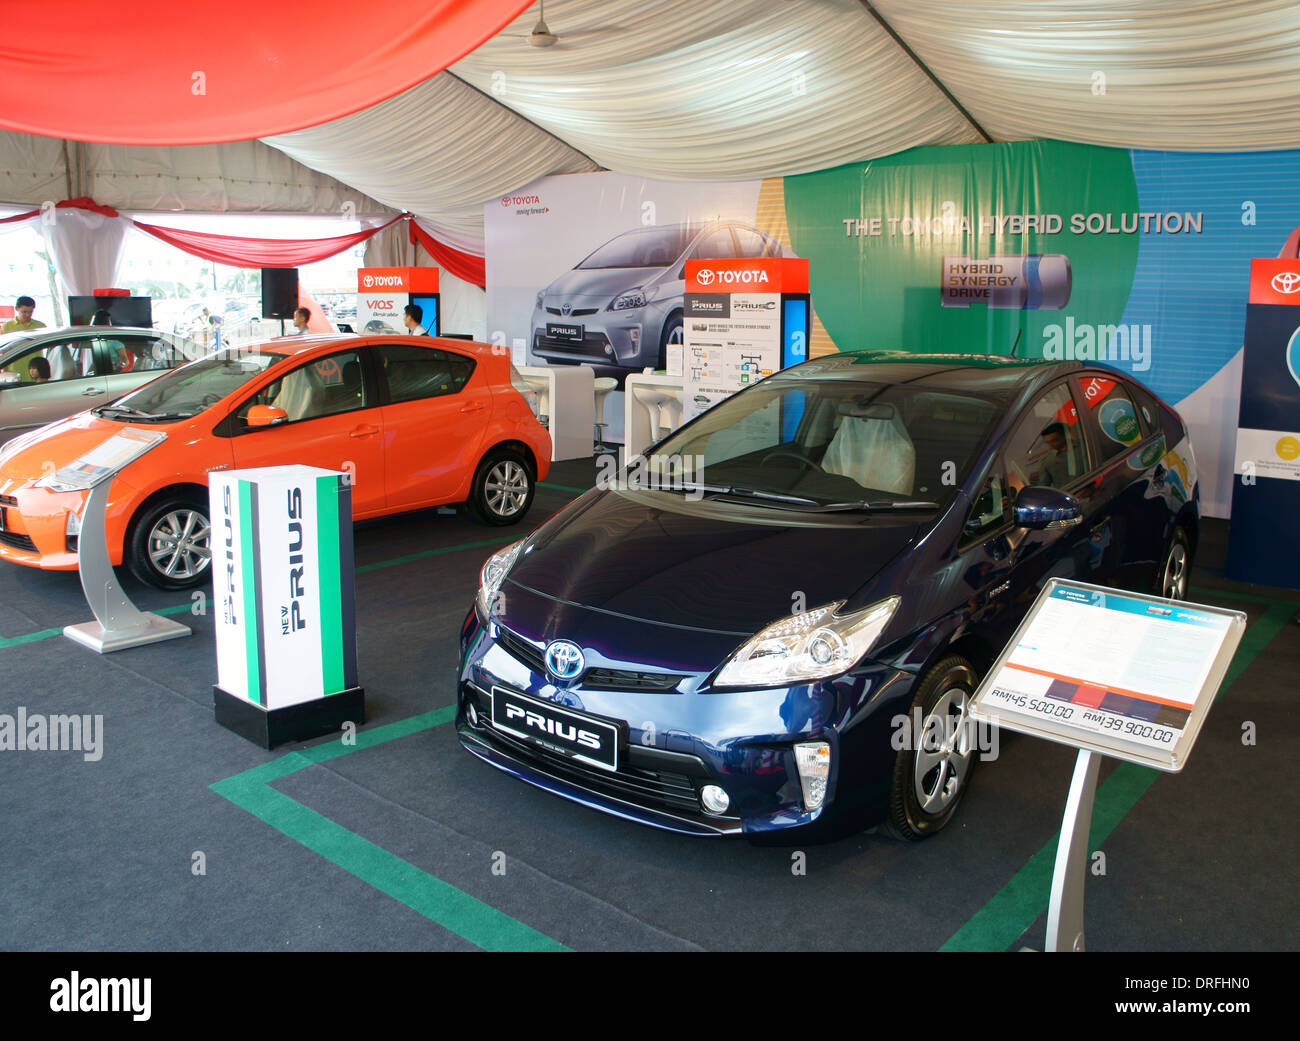 toyota booth at car exhibition in Malaysia Stock Photo